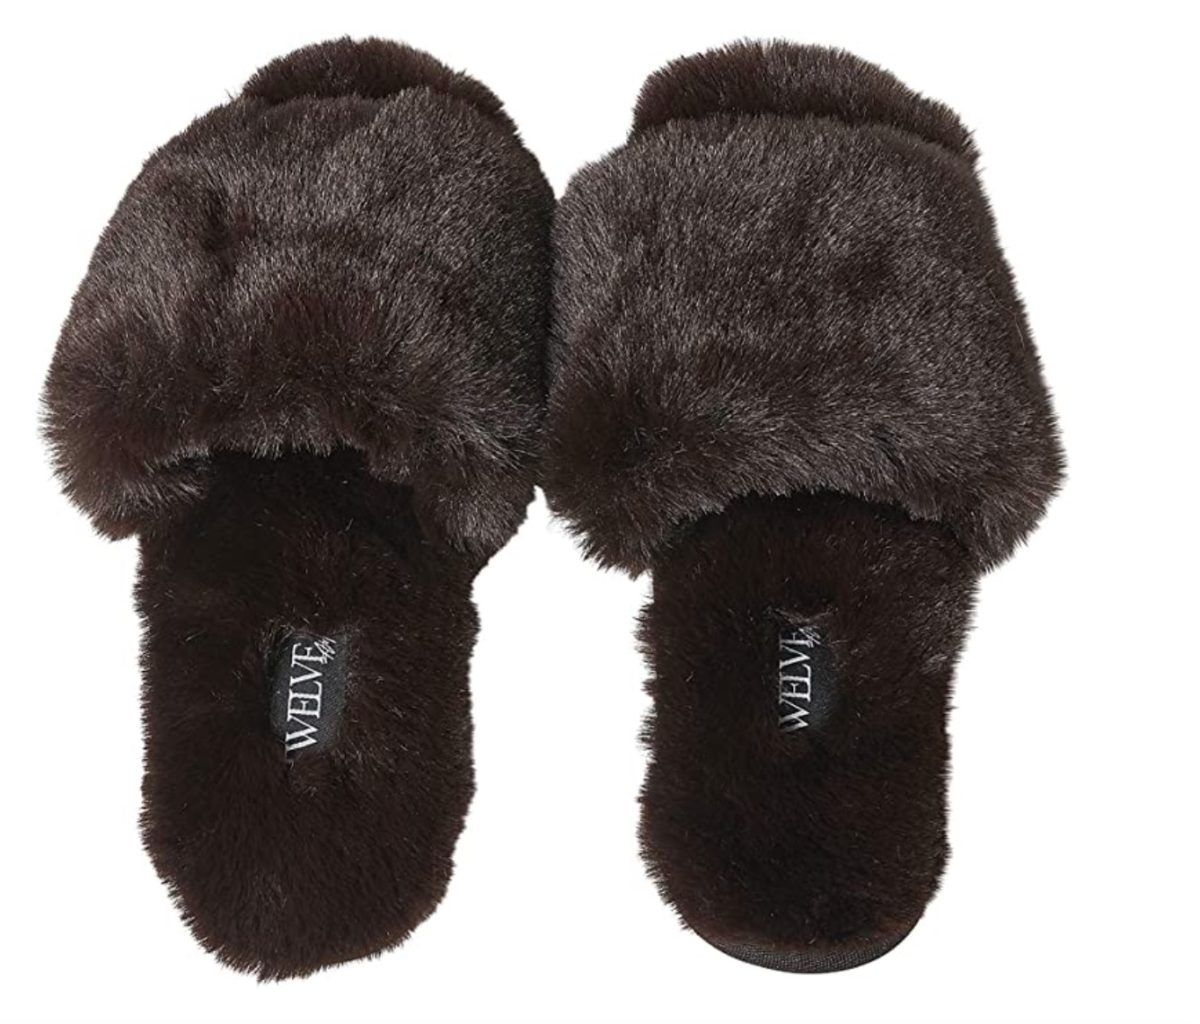 These Are a Few of Oprah's Favorite Things, and You Can Now Buy Them as Christmas Presents on Amazon Christmas, Slippers